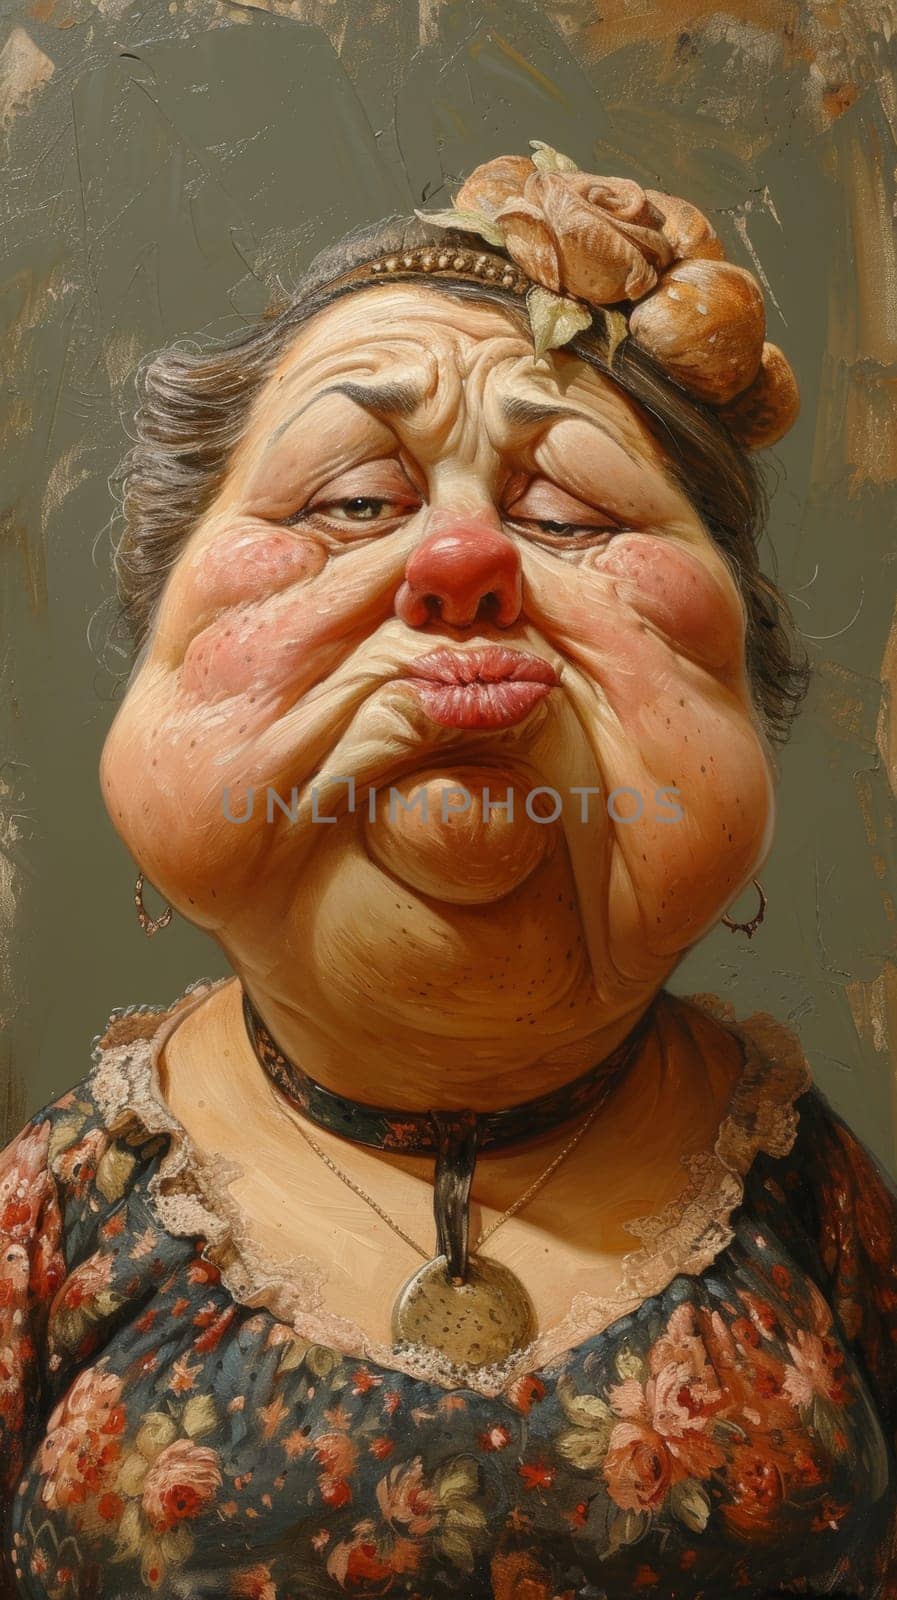 A painting of a woman with an ugly face and big nose